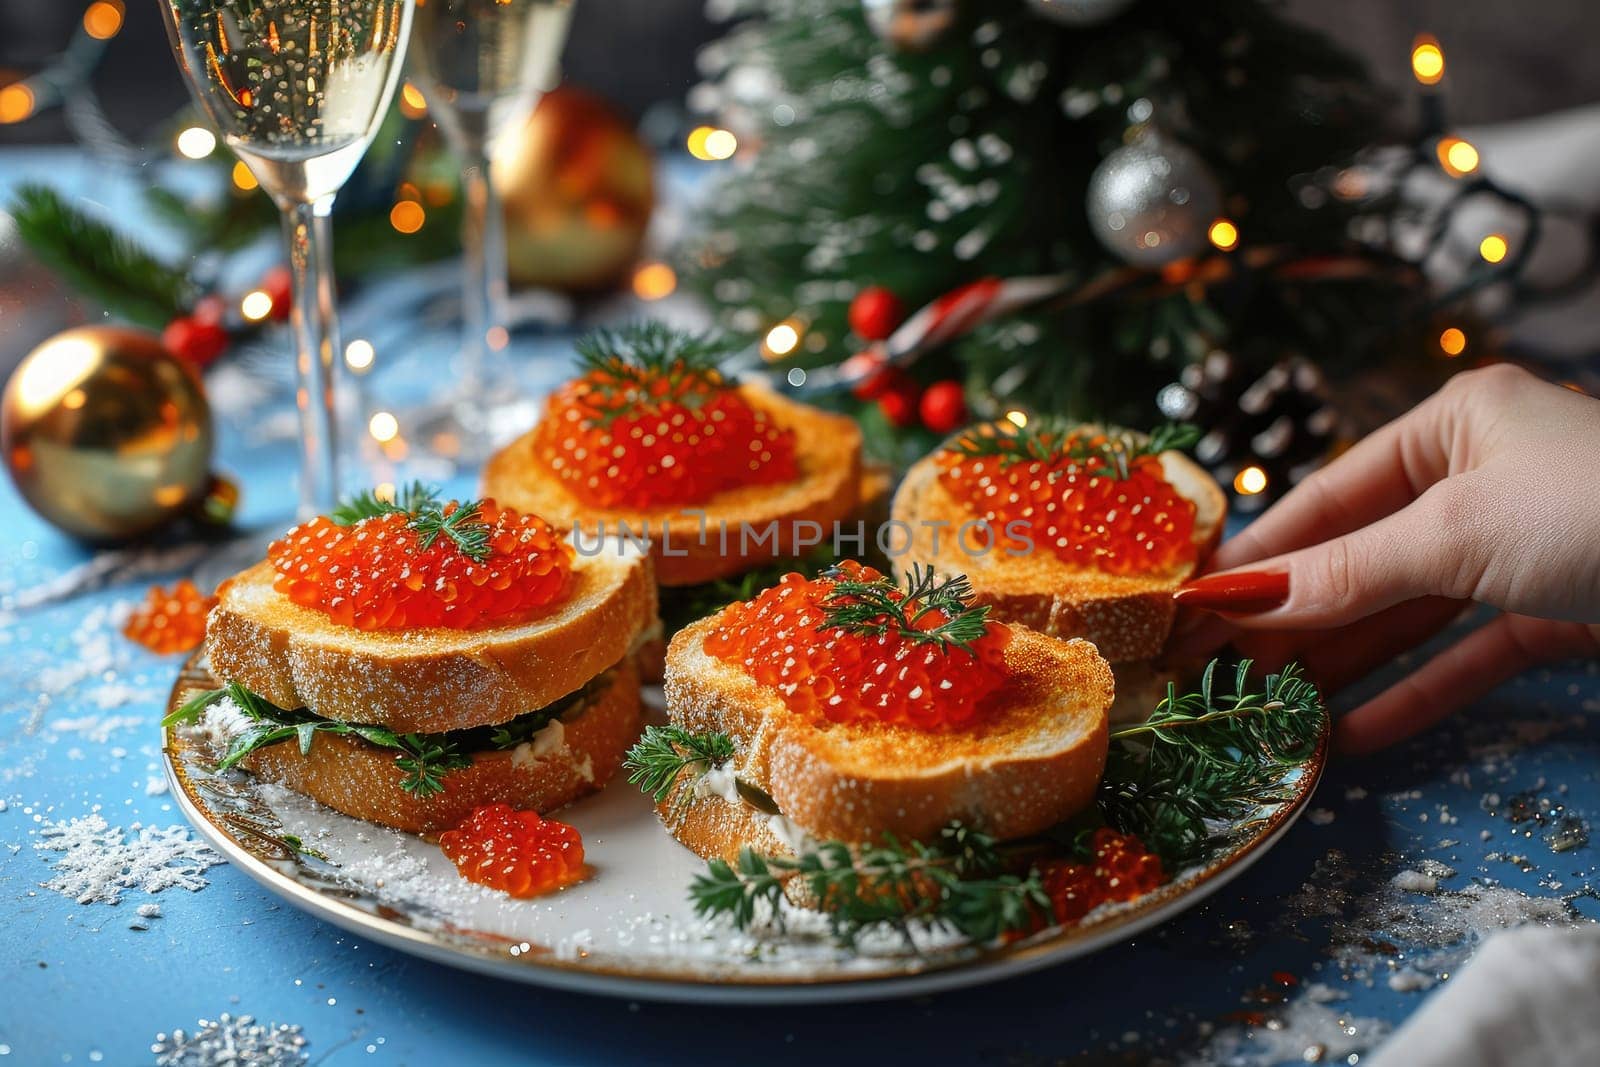 Female hand raising luxury sandwich with red caviar in light of festive atmosphere by Yurich32